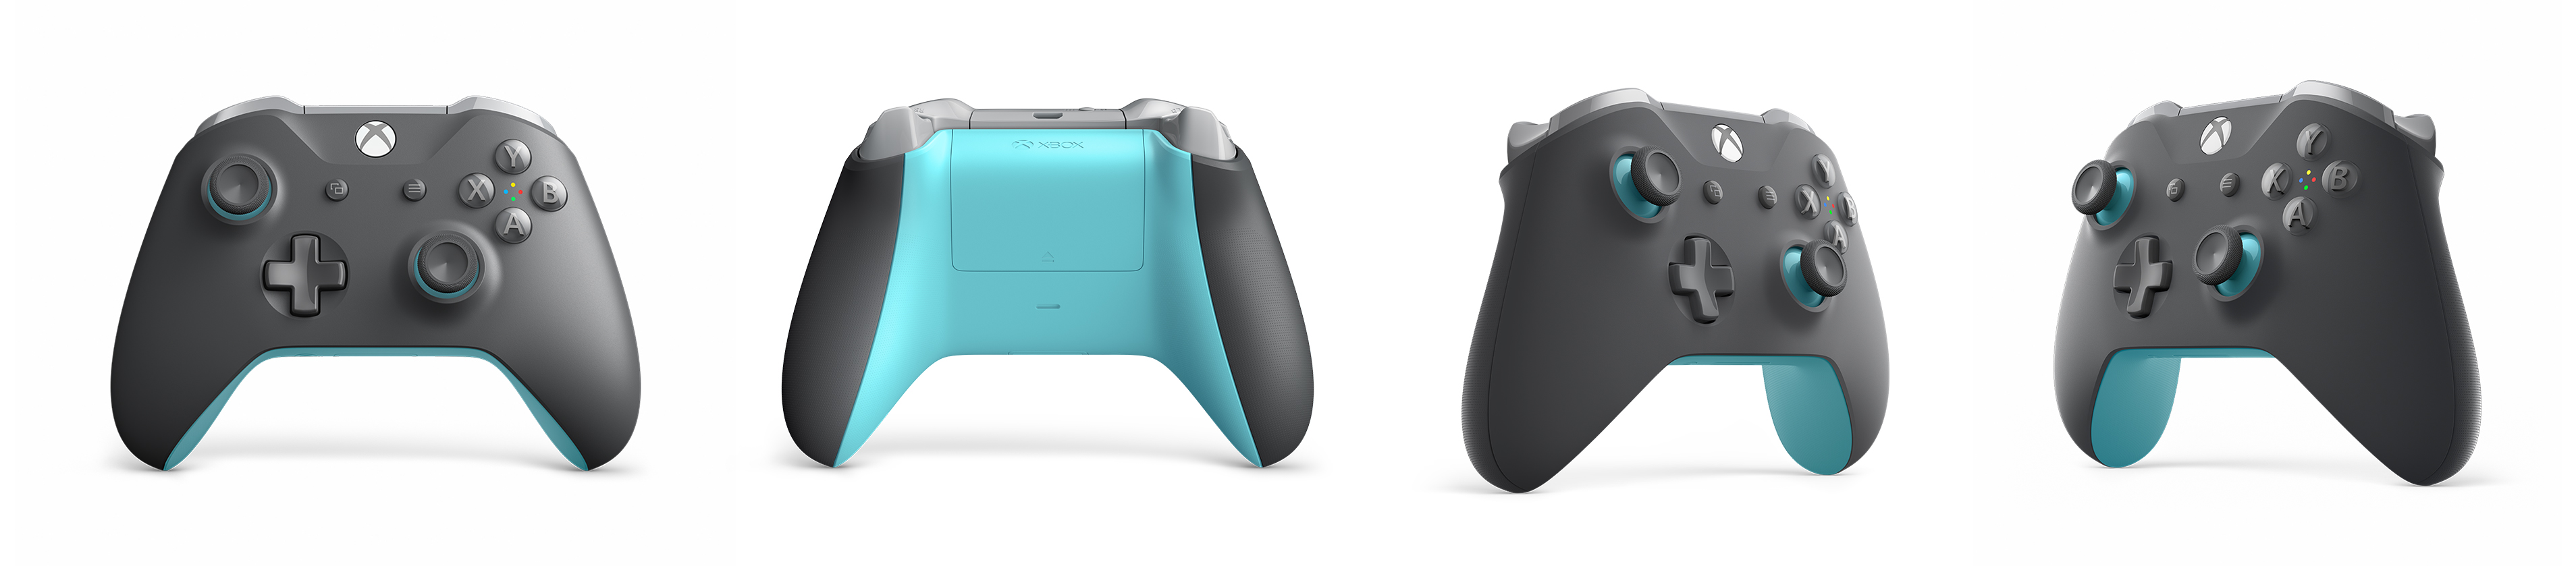 xbox one grey and blue controller